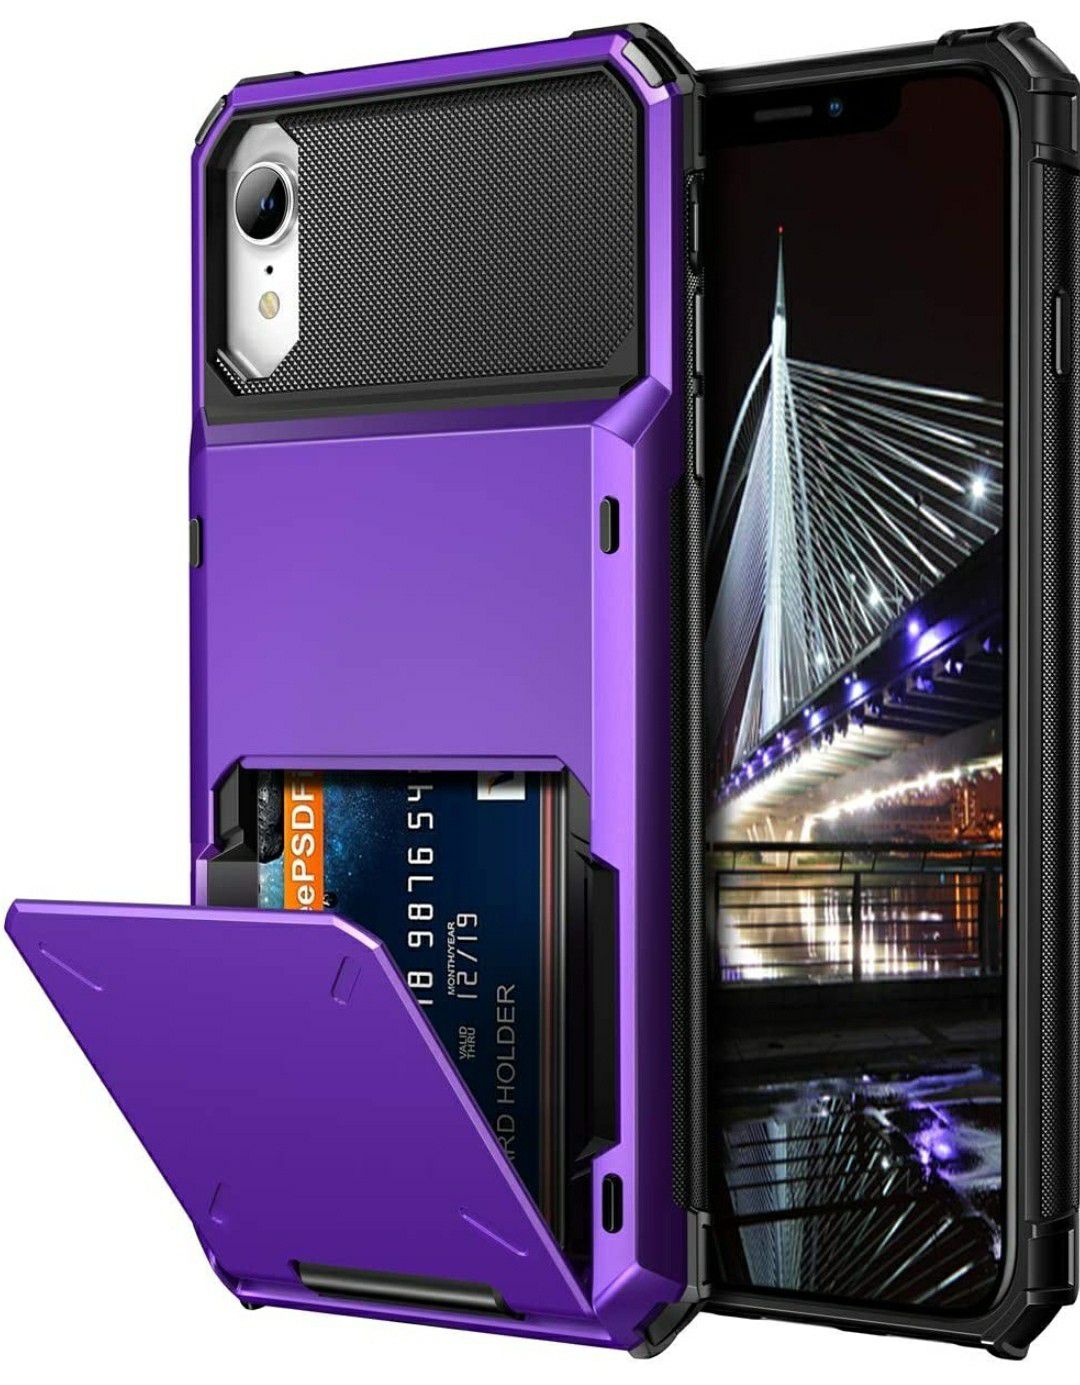 Brand new iPhone XR Case Wallet ID Slot Credit Card Holder Spring Pocket Scratch Resistant Dual Layer Protective Bumper